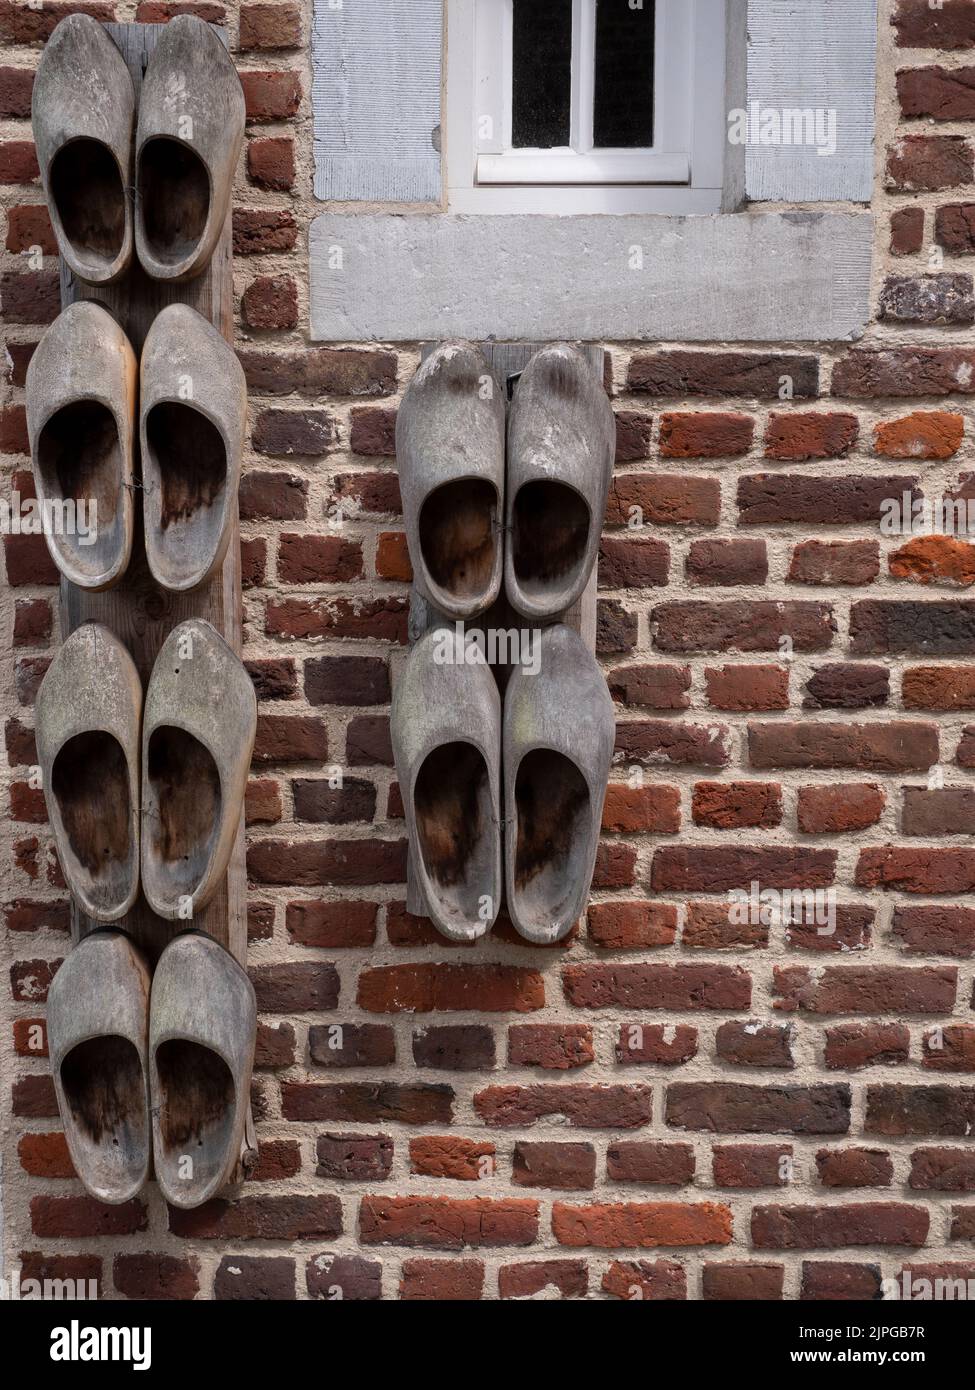 Wooden clogs attached to an old brick wall with a small window Stock Photo